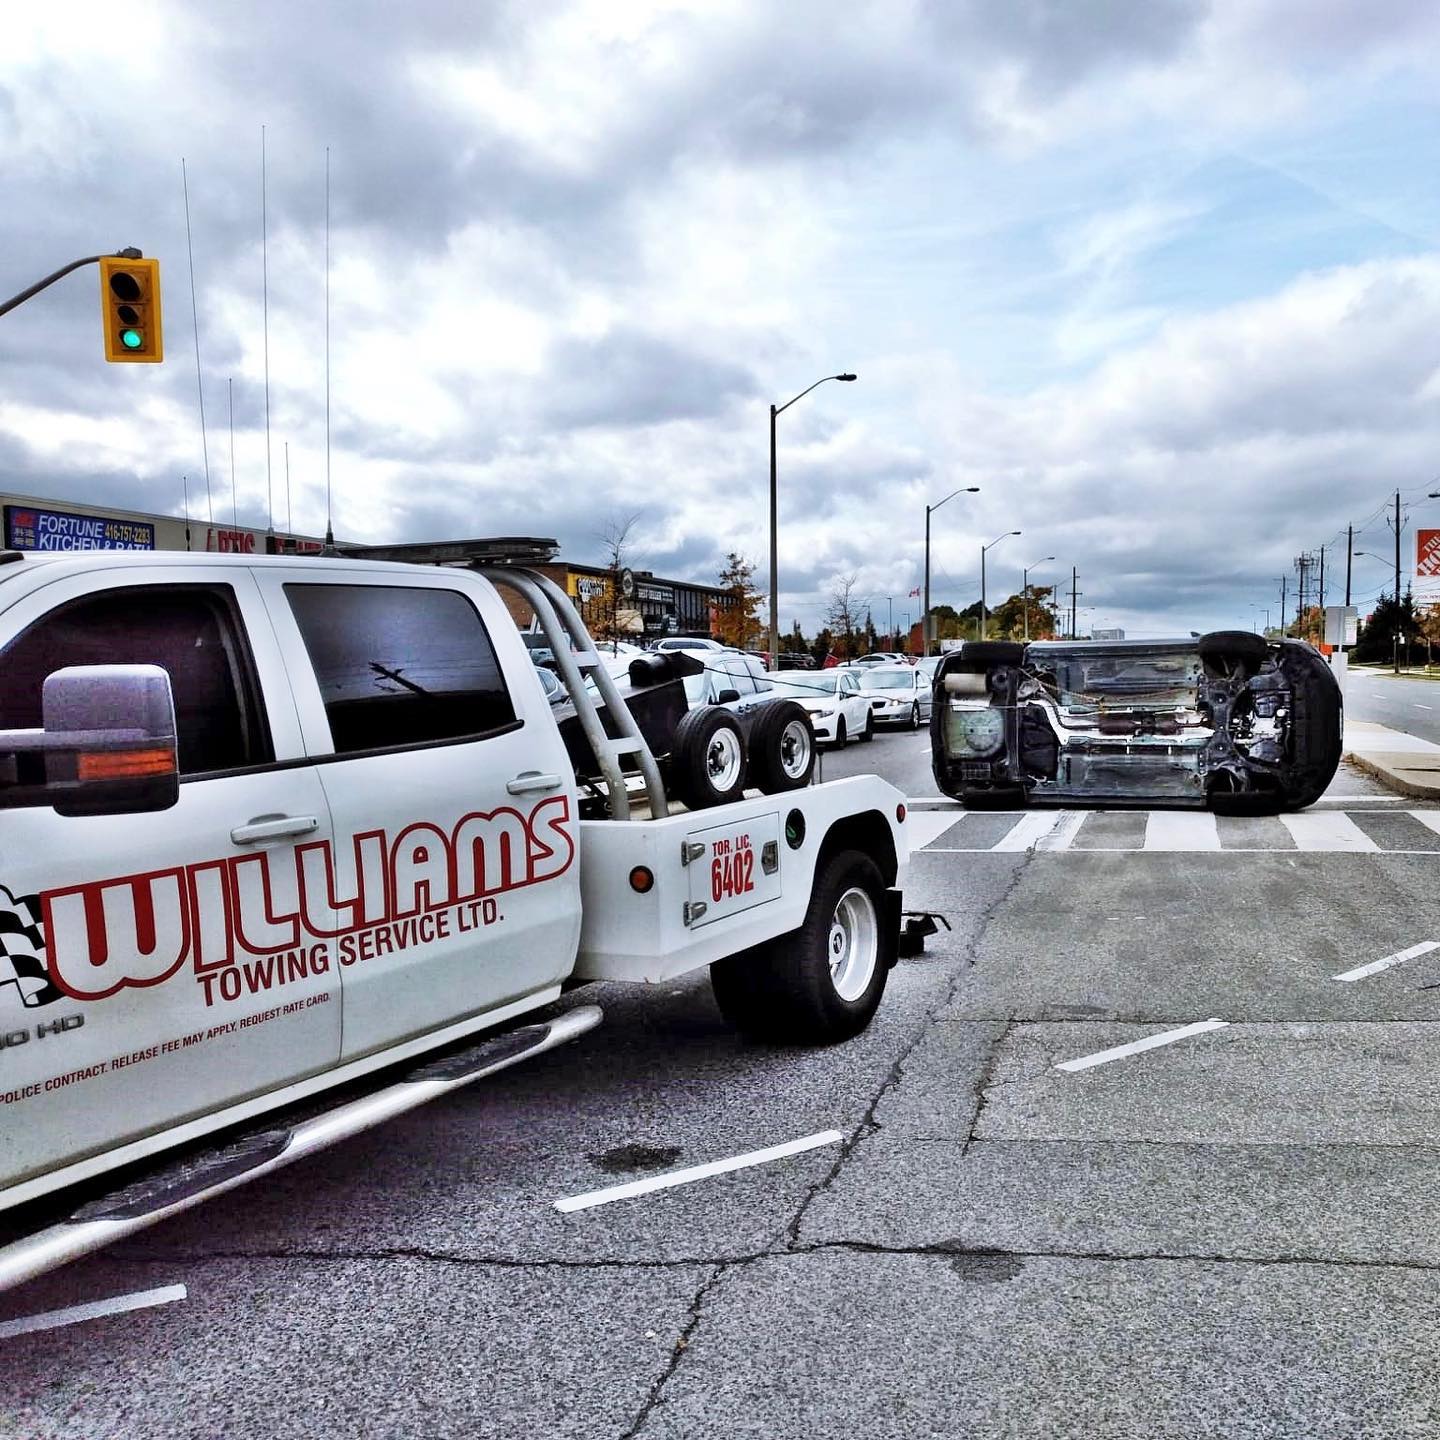 Williams Towing - Professional Vehicle Recovery Services in Toronto | Williams Towing